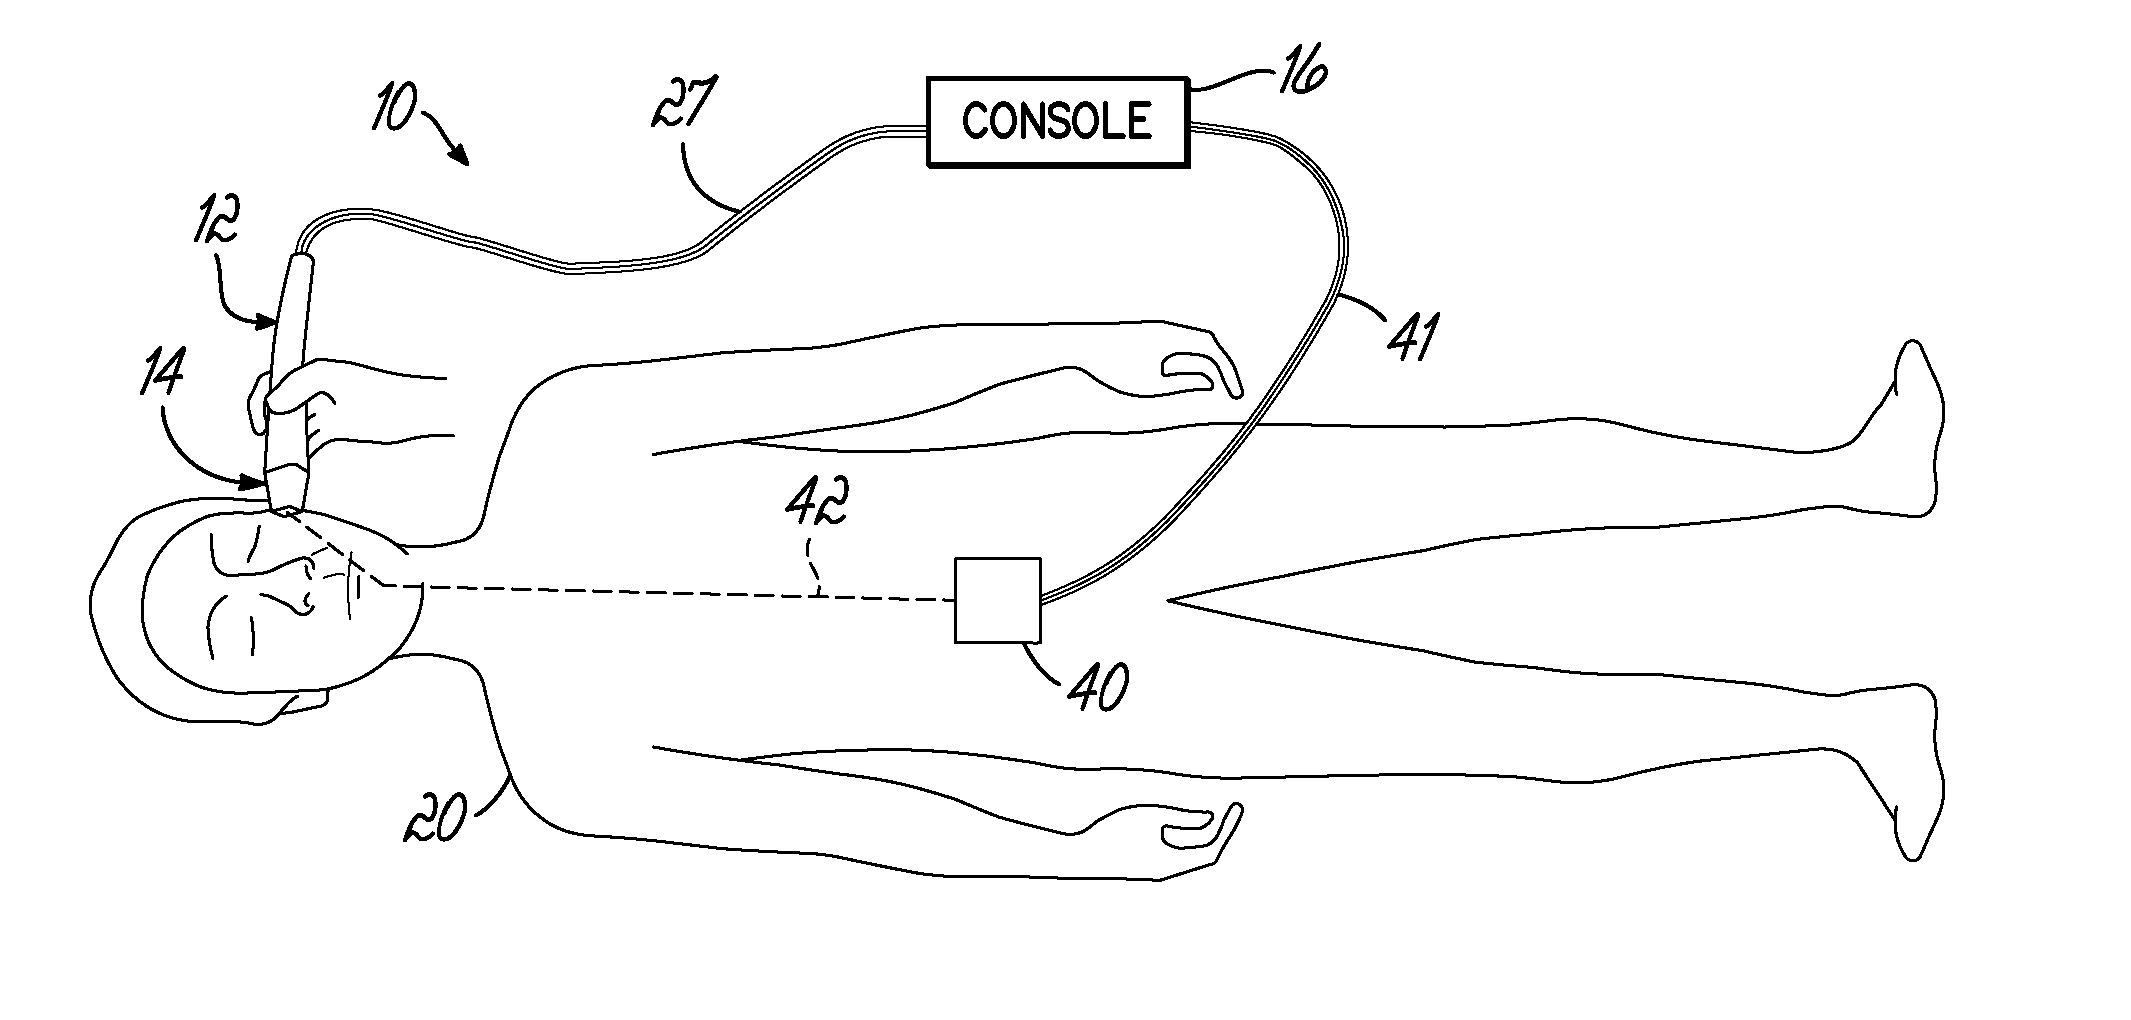 Apparatus and methods for cooling a treatment apparatus configured to non-invasively deliver electromagnetic energy to a patient's tissue